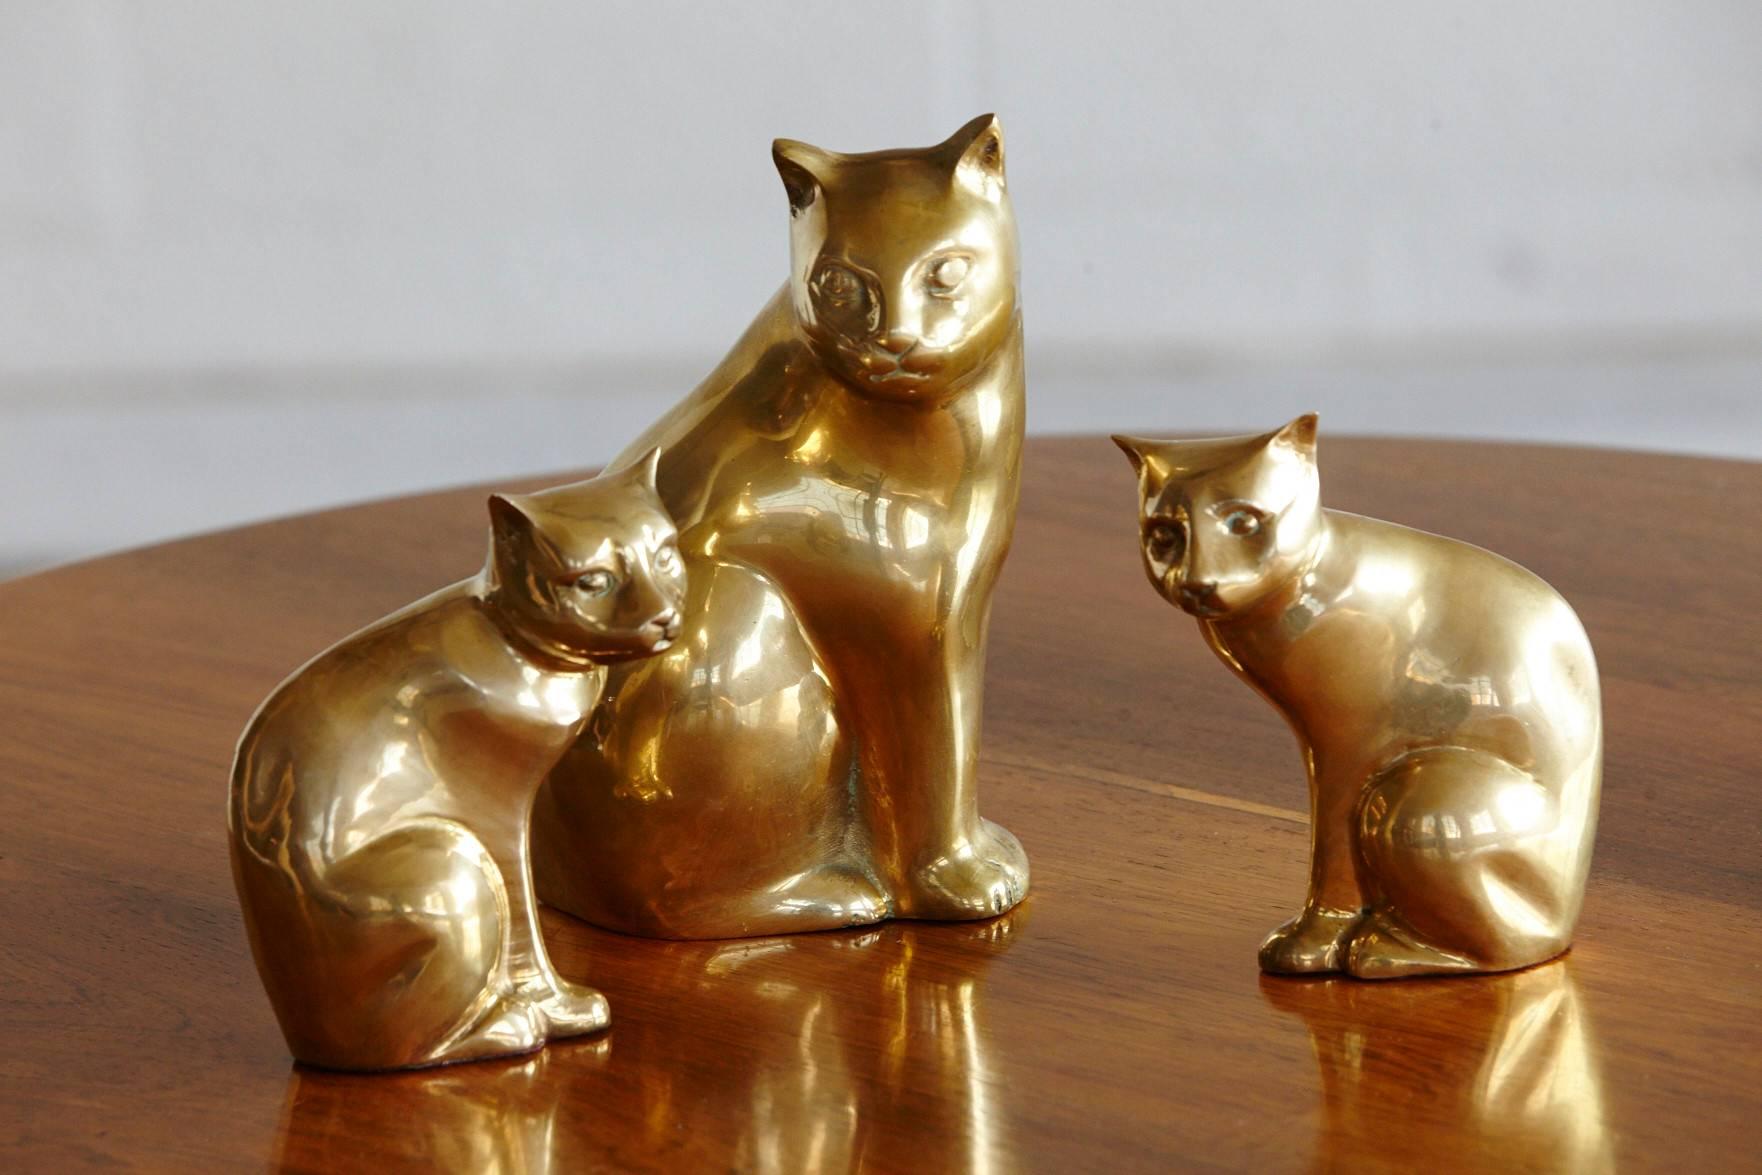 Cute little brass cat family, a mother and two kittens with a nice patina.
Dimensions:
Large cat: H 8.75 in x W 5 in x D 3 in
Small cats: H 6 in x W 4.5 in x D 2 in.